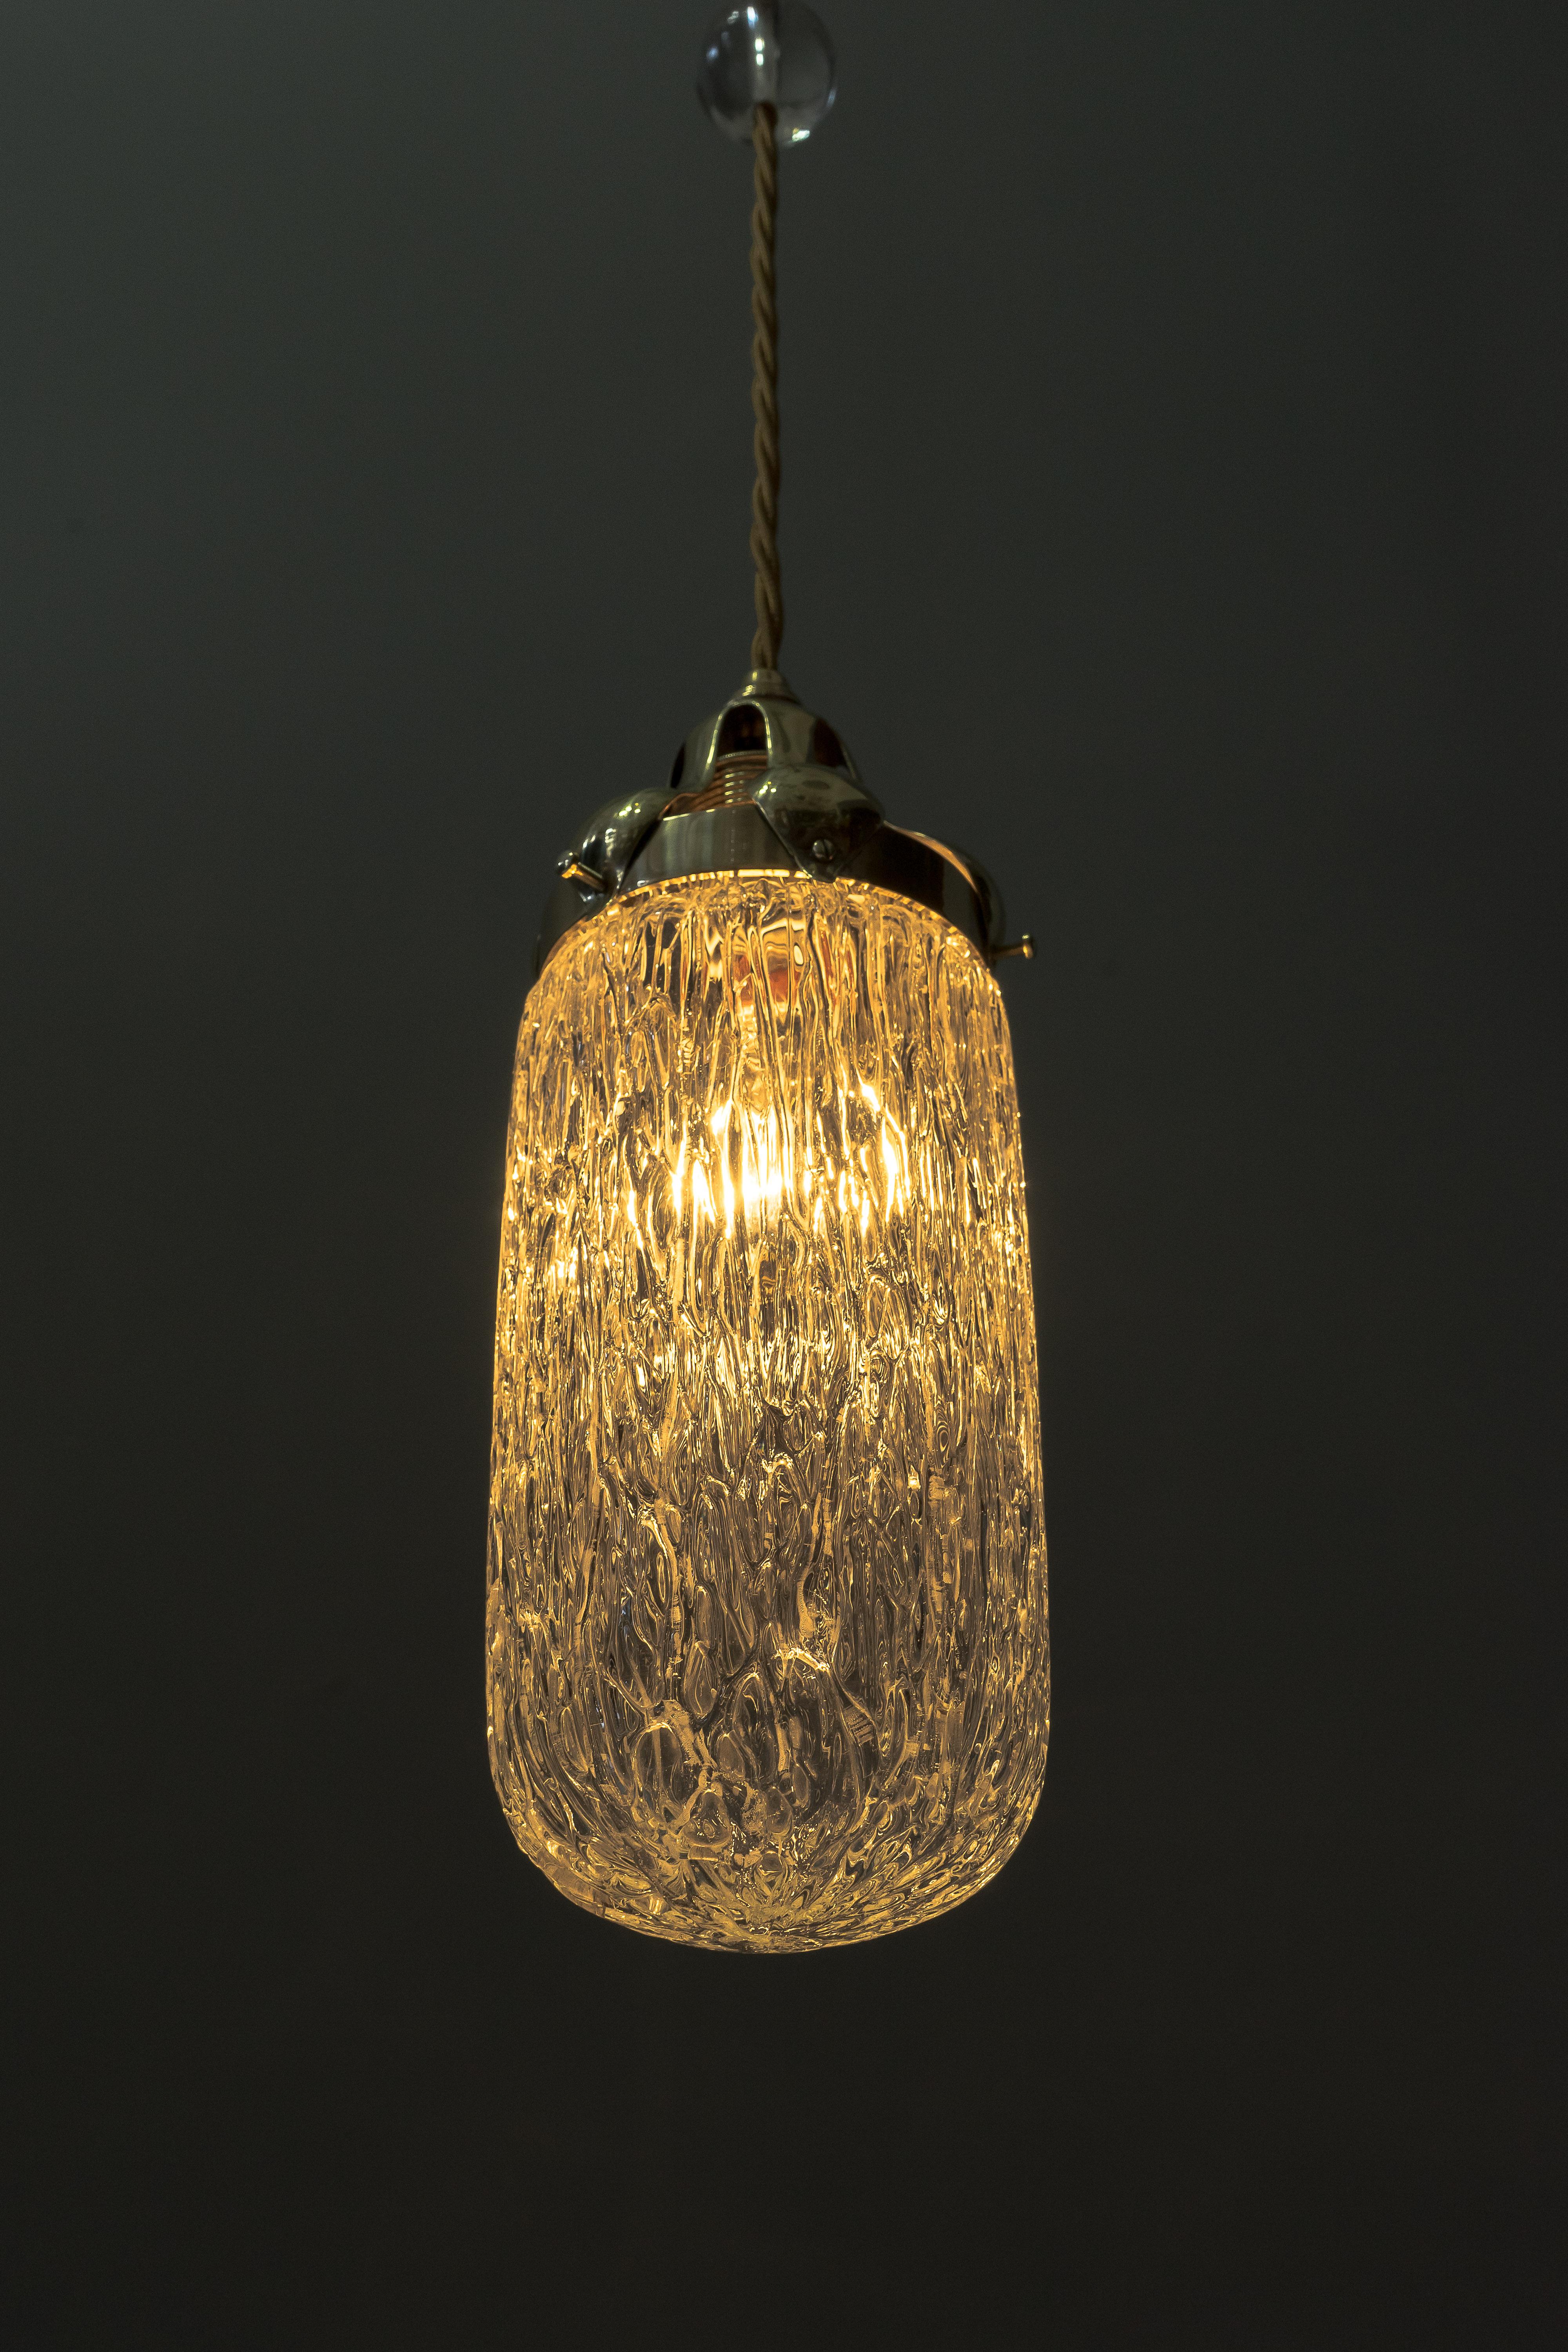 Leopold Bauer Hanging Lamp with Loetz Witwe “Blitzglas” Shade, circa 1905 For Sale 3